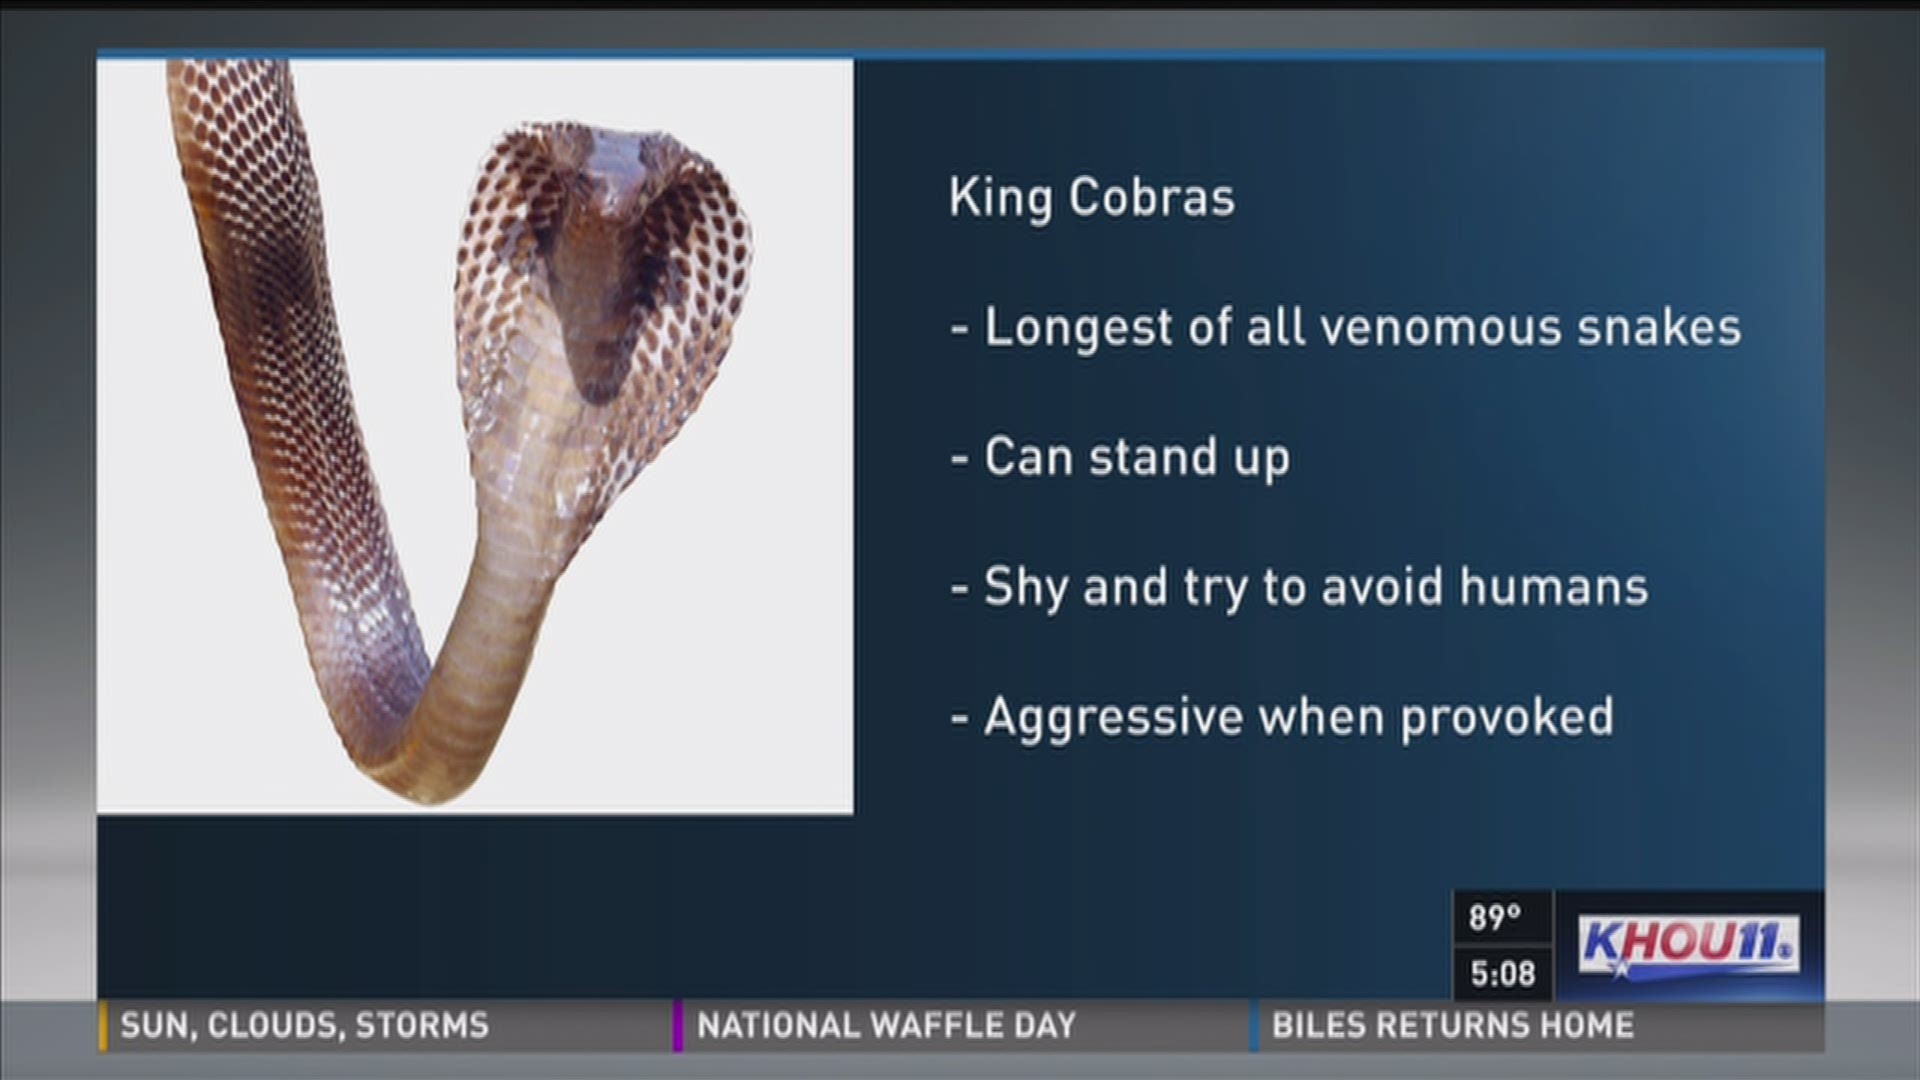 Everything you need to know about king cobras.